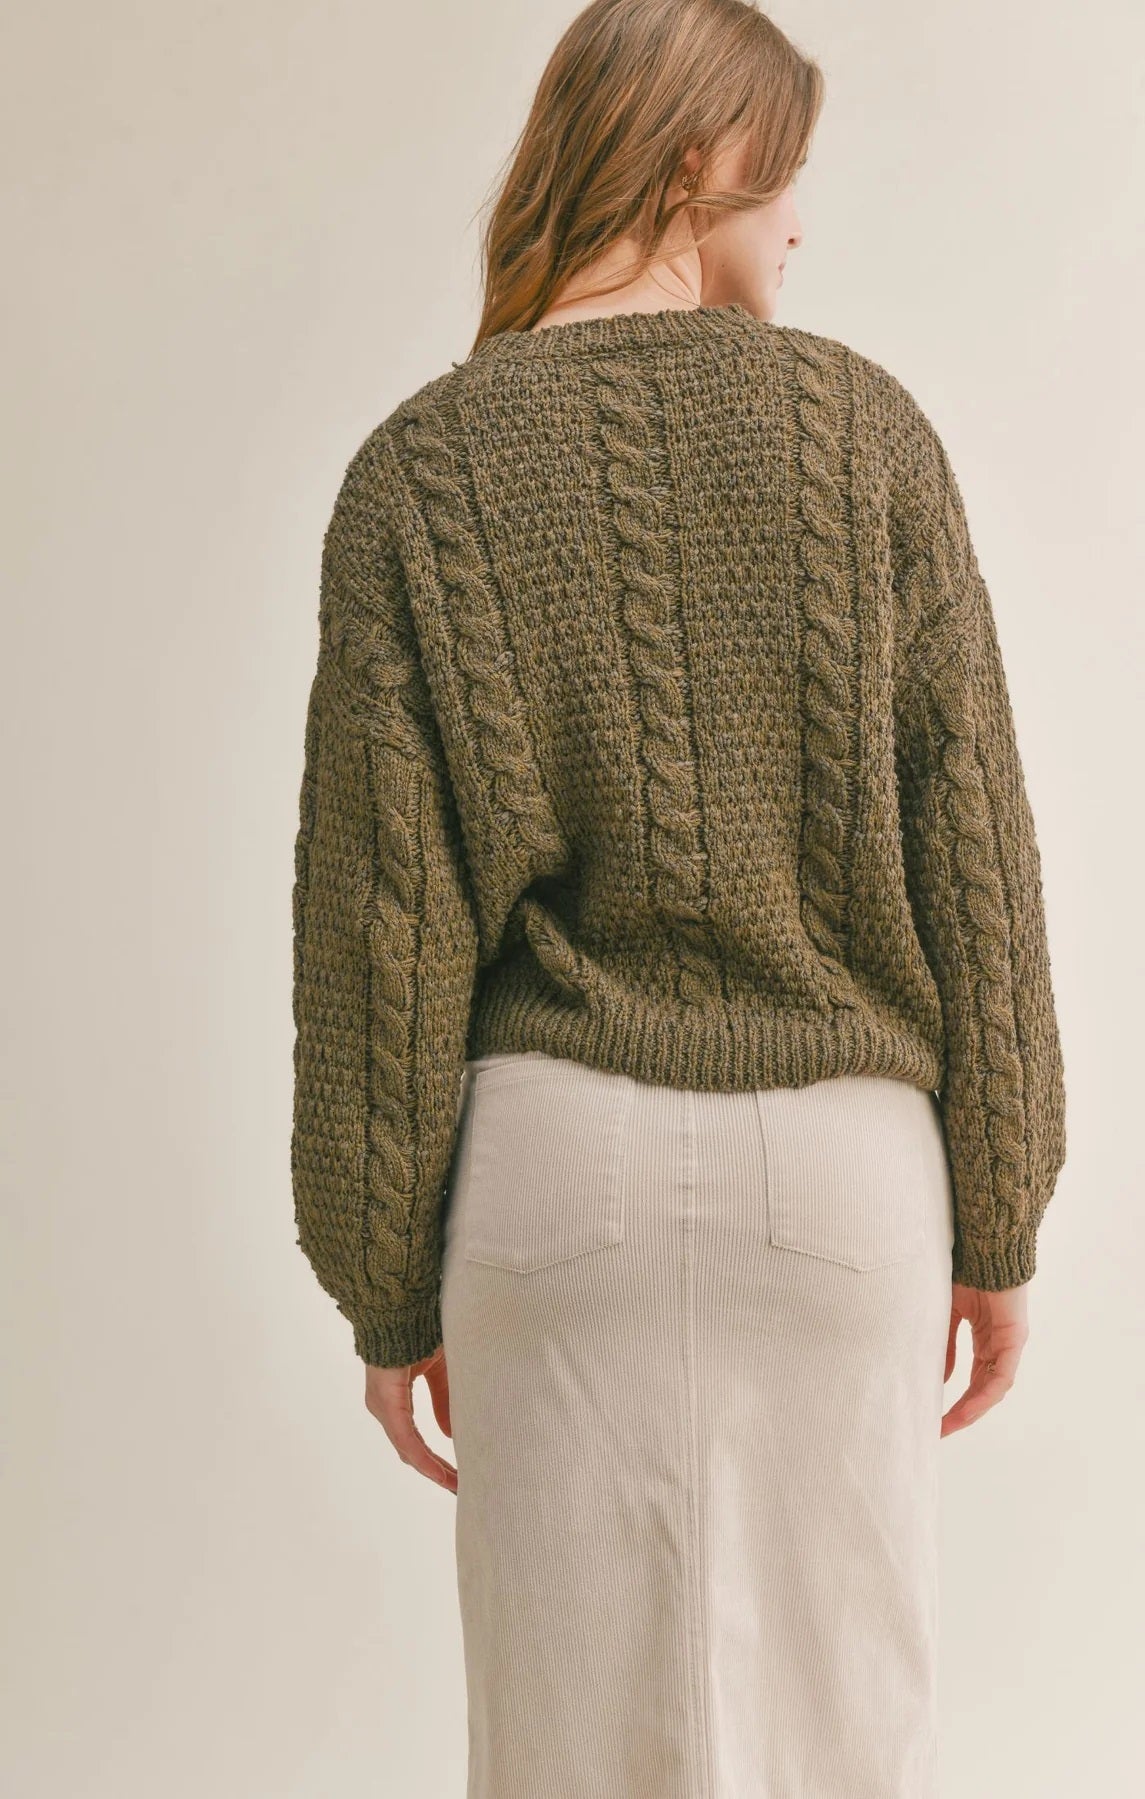 Sadie & Sage, Vera Cable Knit Sweater in Olive - Boutique Dandelion